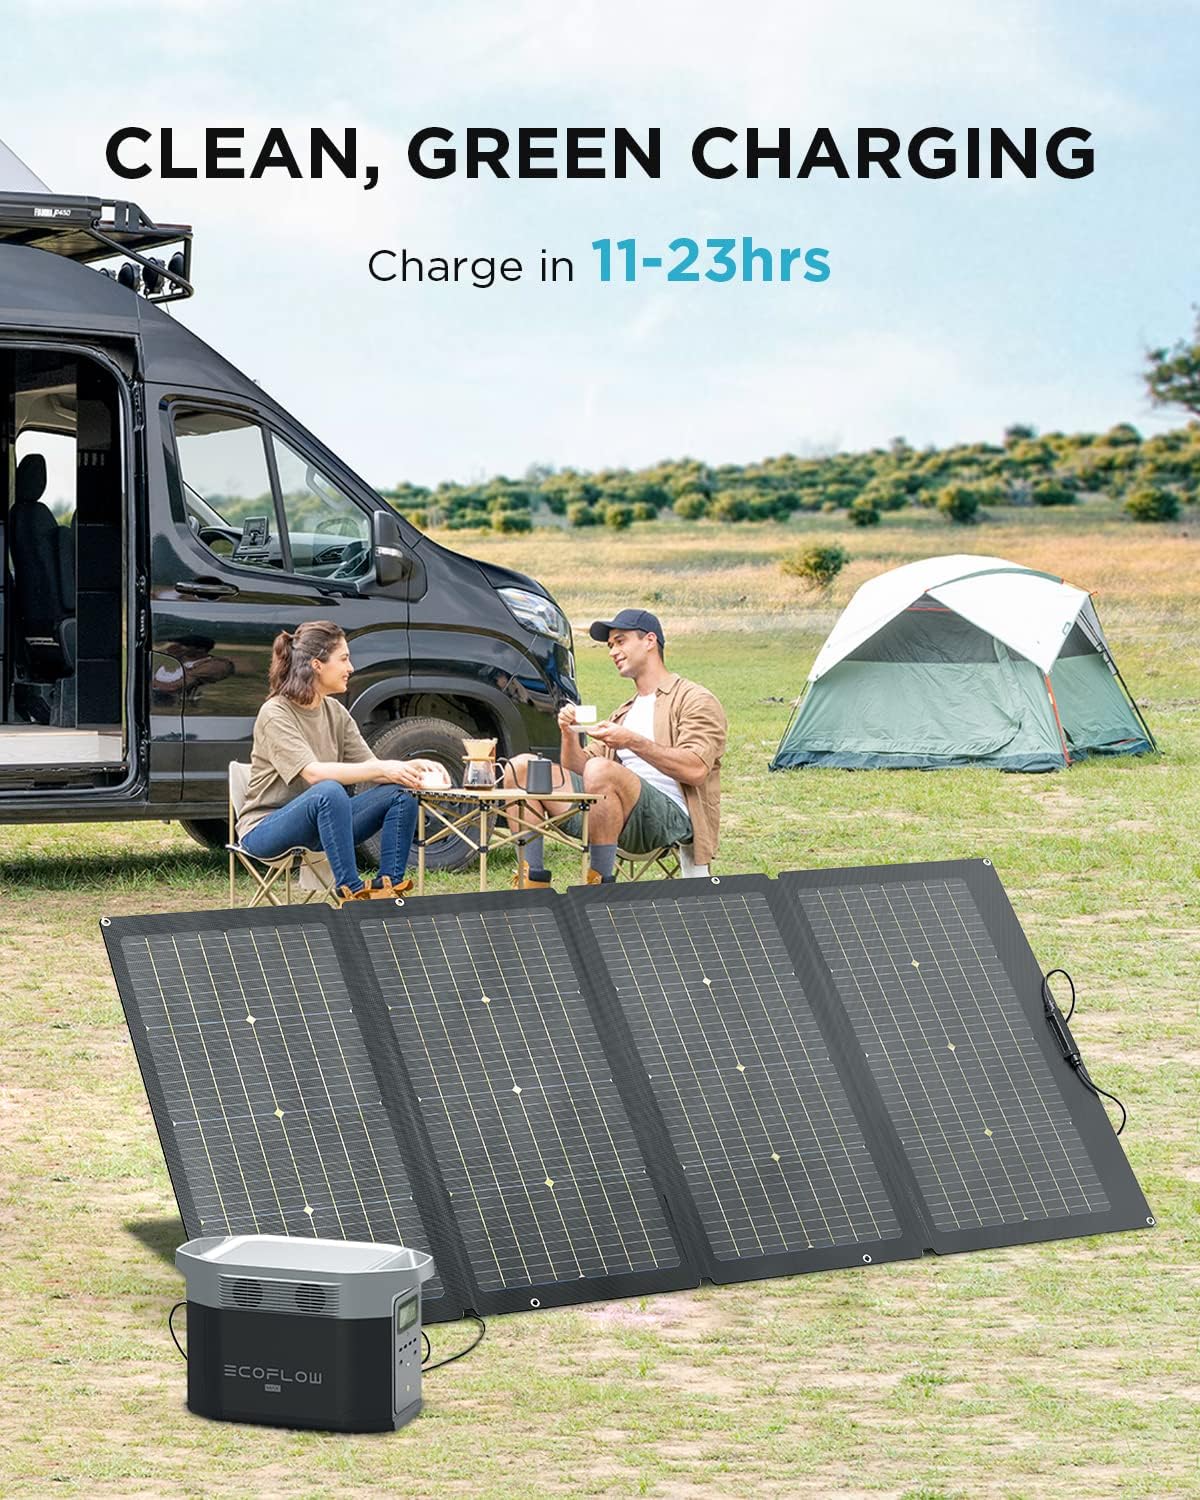 Professional Title: "High-Capacity Solar Generator DELTA Max (2000) 2016Wh with Powerful 220W Solar Panel, 6 X 2400W (5000W Surge) AC Outlets, Portable Power Station for Home Backup, Outdoor Adventures, Camping, RV, and Emergency Situations"